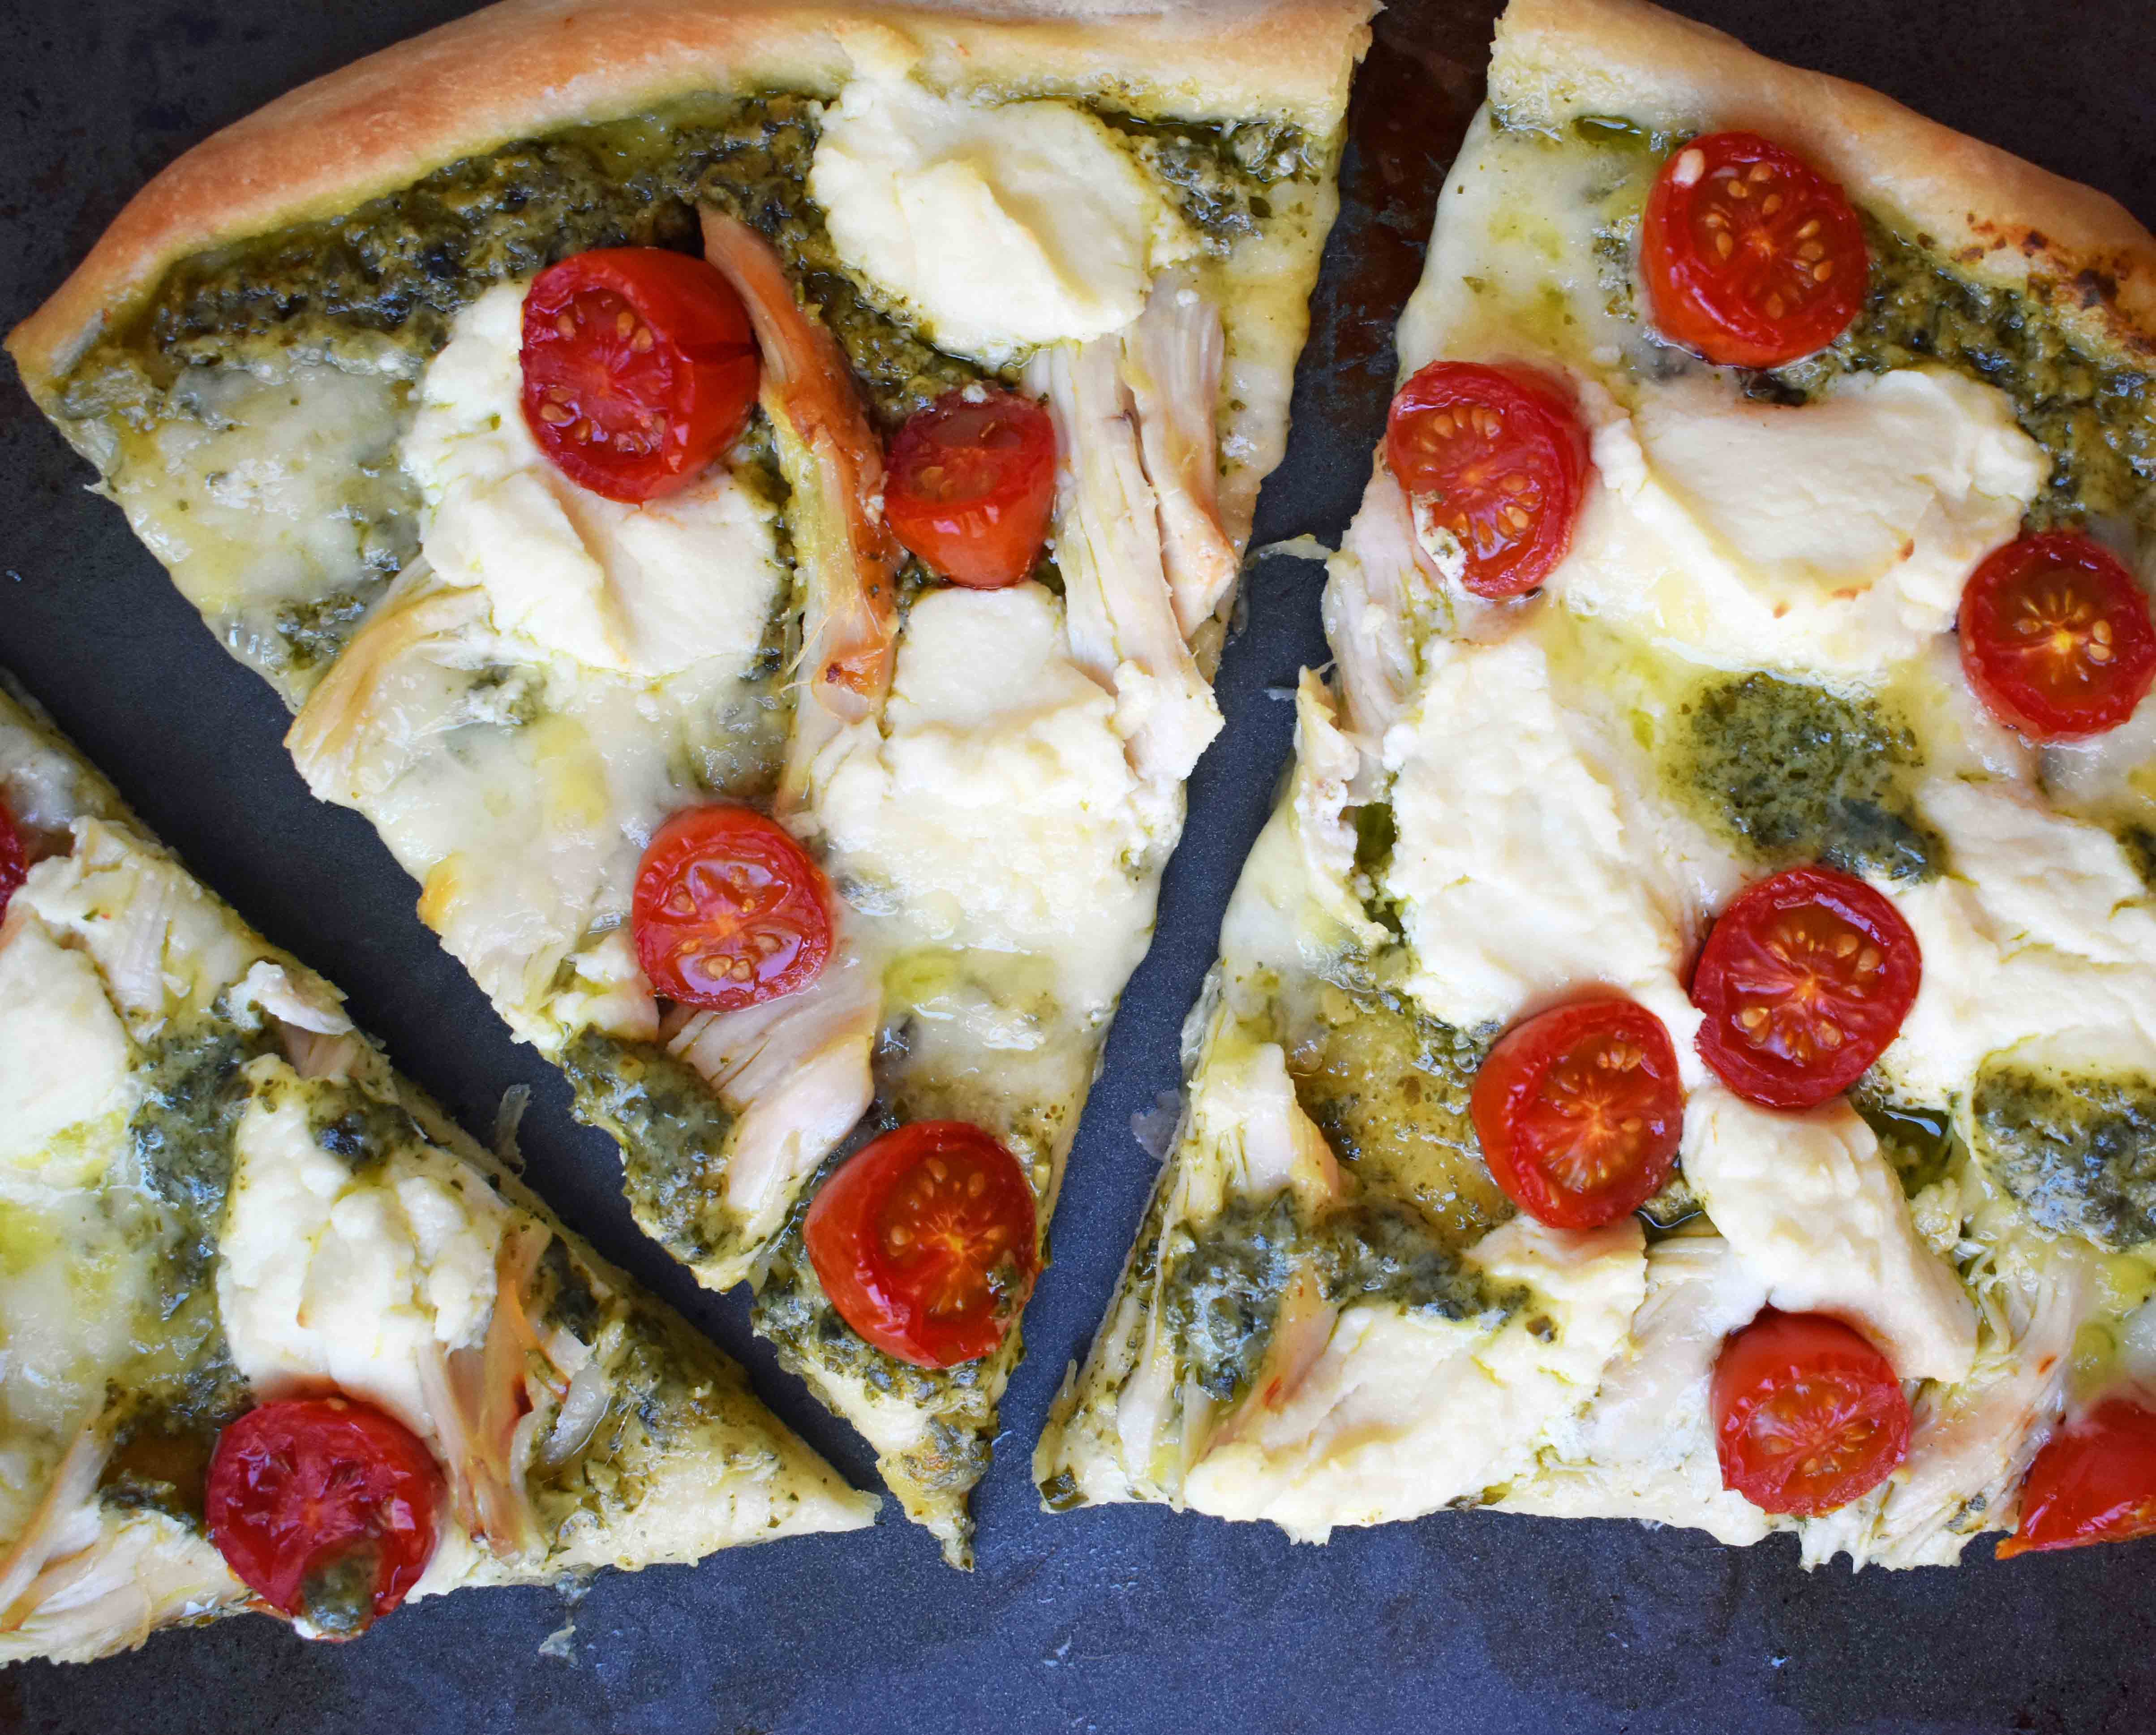 Chicken Pesto Pizza made with only 5 ingredients -- refrigerated pizza dough, pesto sauce, rotisserie chicken, ricotta cheese, and fresh mozzarella. May add grape tomatoes if so desired. An easy, flavorful homemade white pizza. www.modernhoney.com